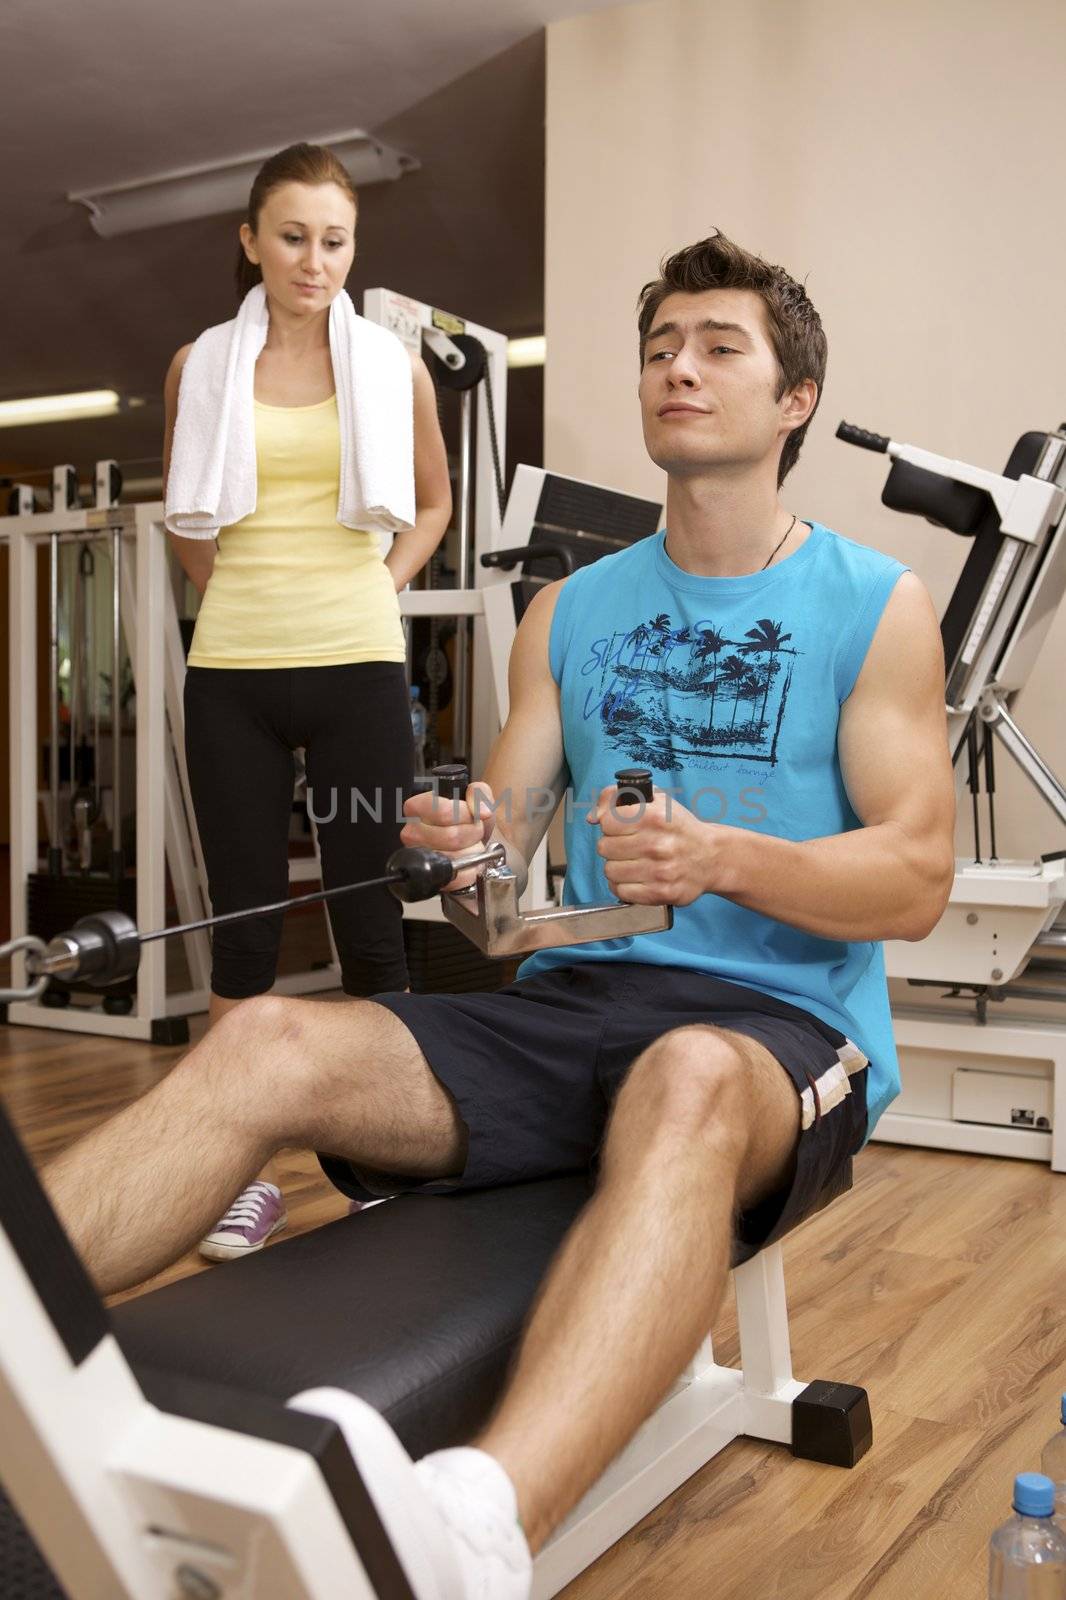 A young man exercising with a personal trainer